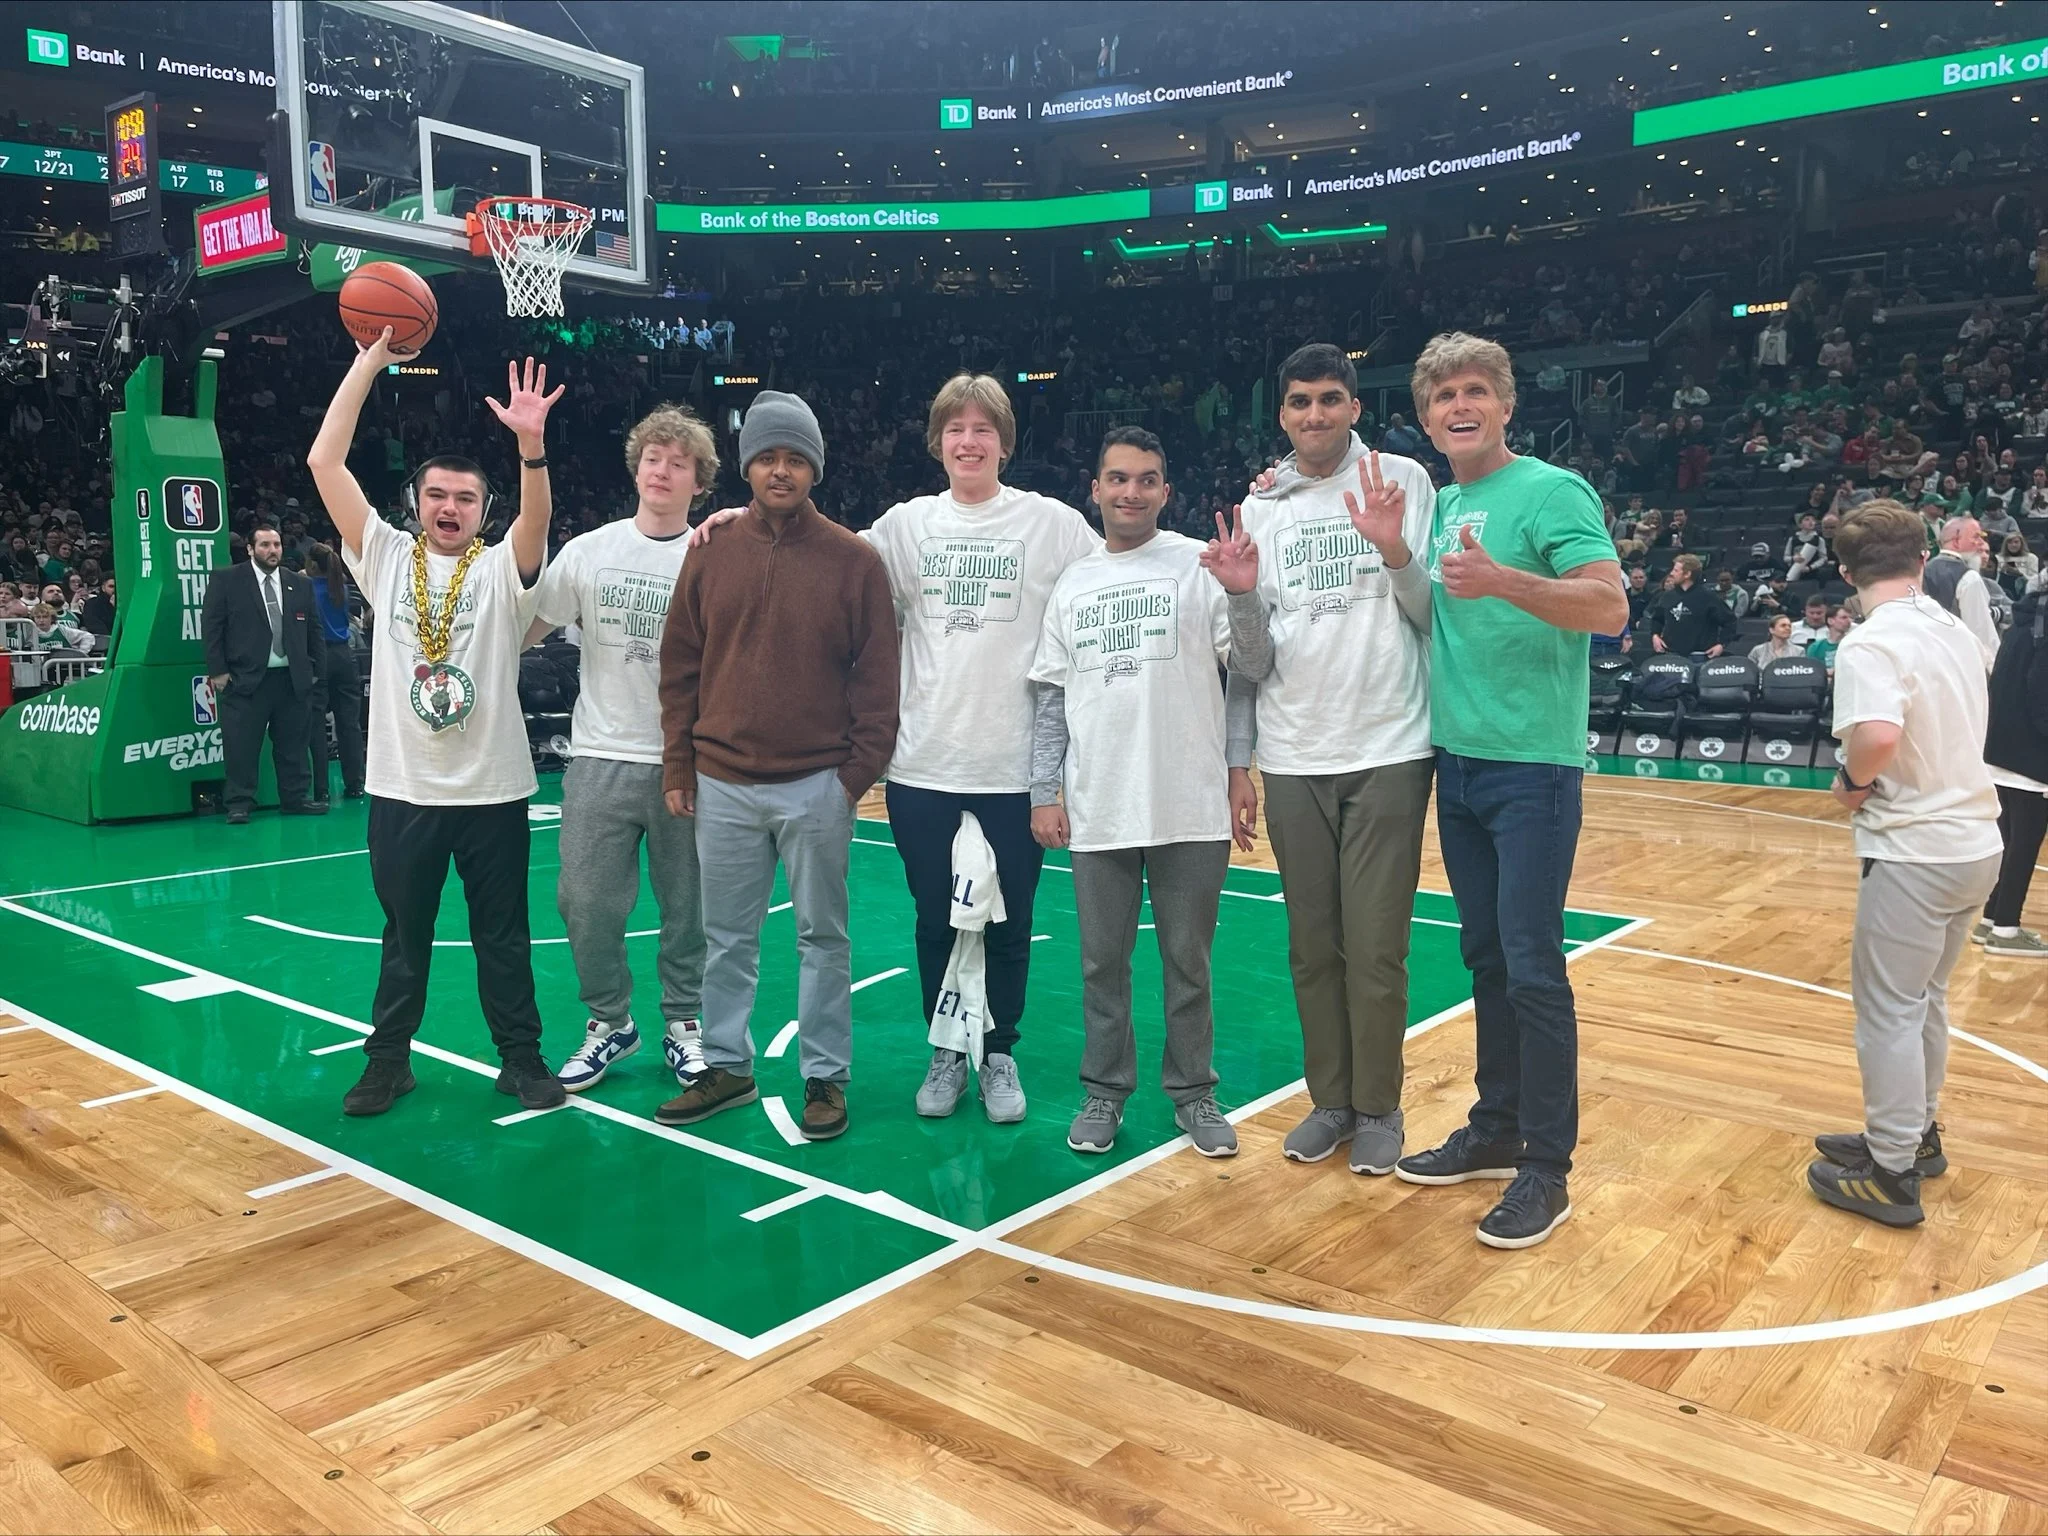 Anthony K. Shriver (right) and Best Buddies participants at the Celtics game.